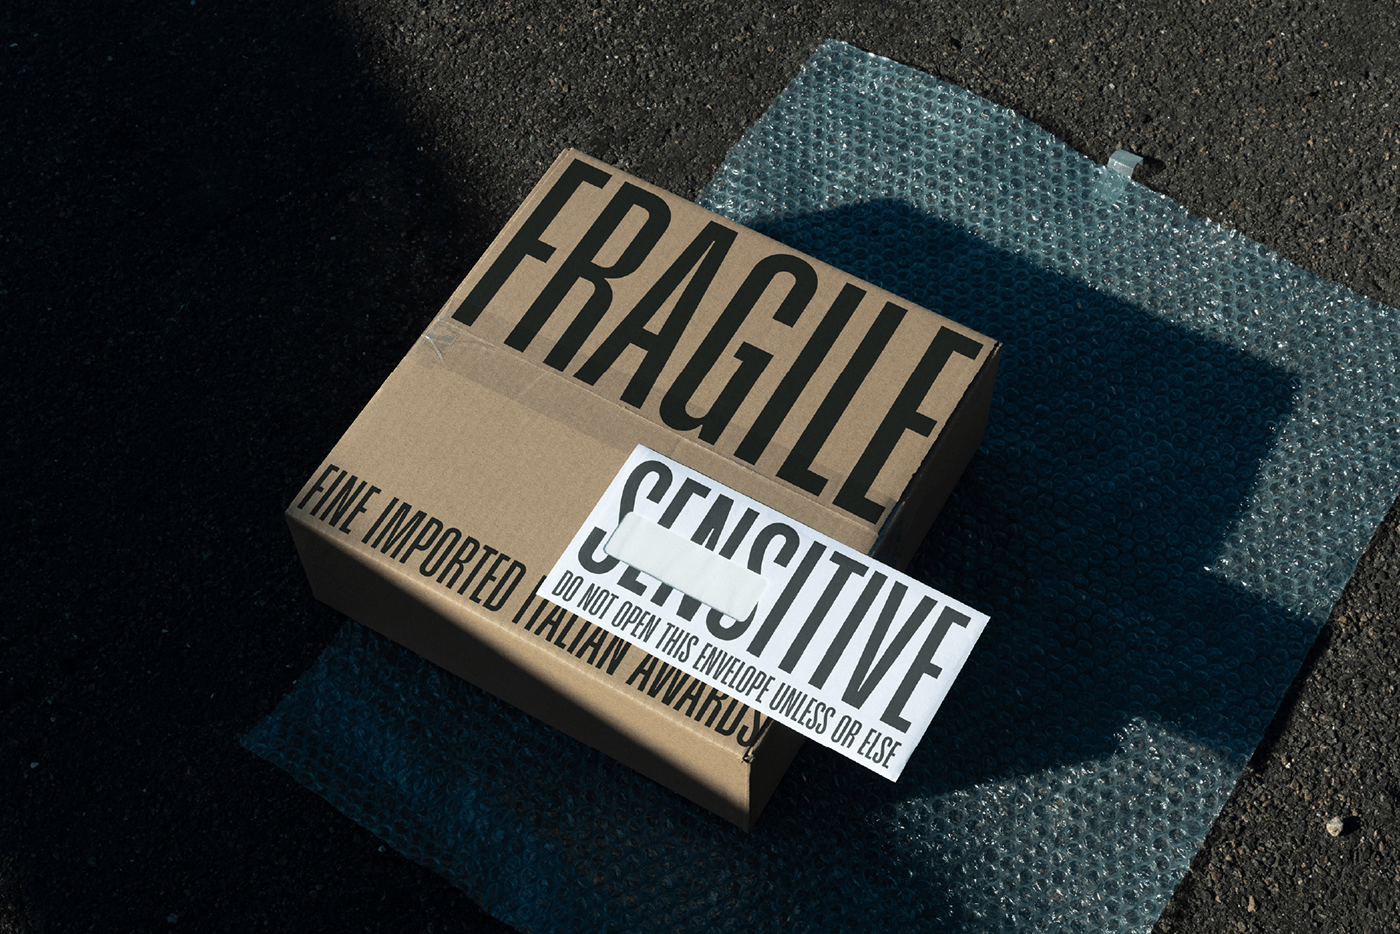 a box that says "fragile" imported form Italy